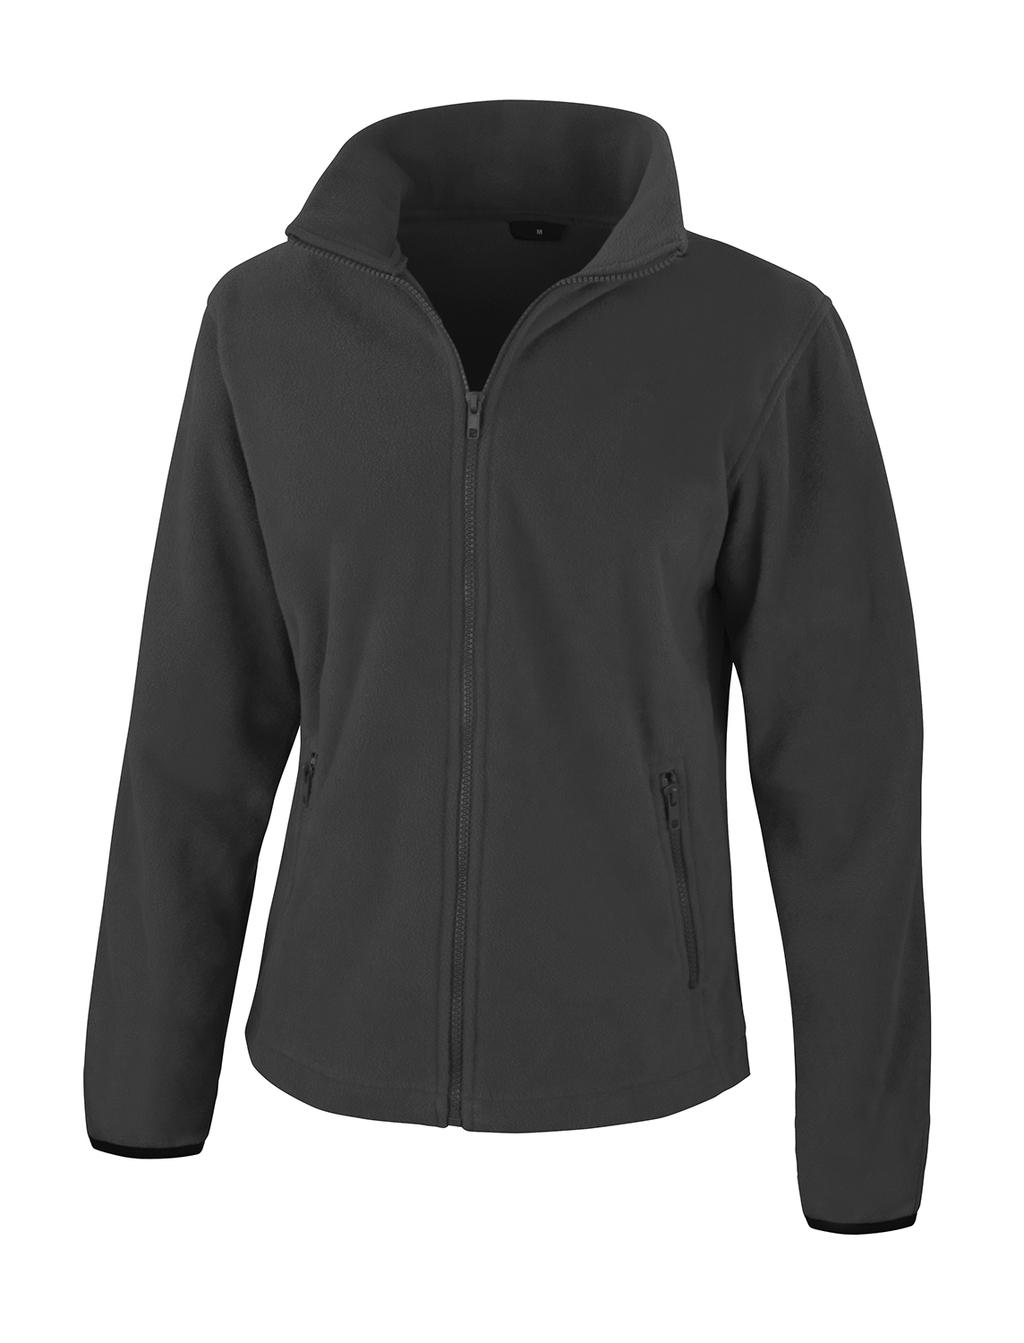  Womens Fashion Fit Outdoor Fleece in Farbe Black